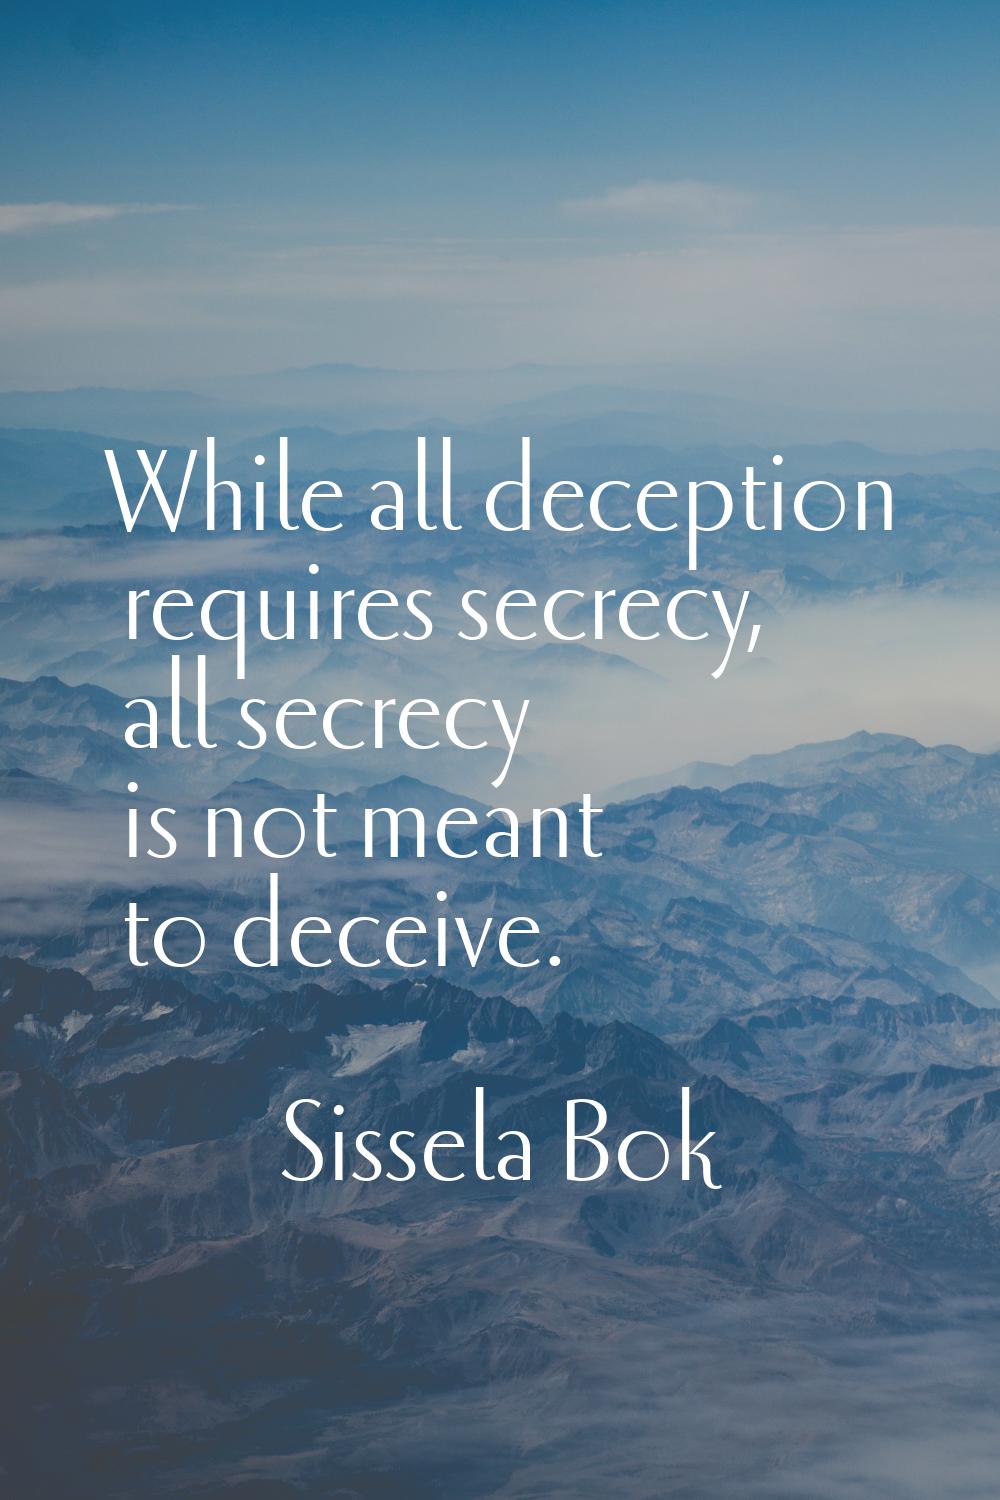 While all deception requires secrecy, all secrecy is not meant to deceive.